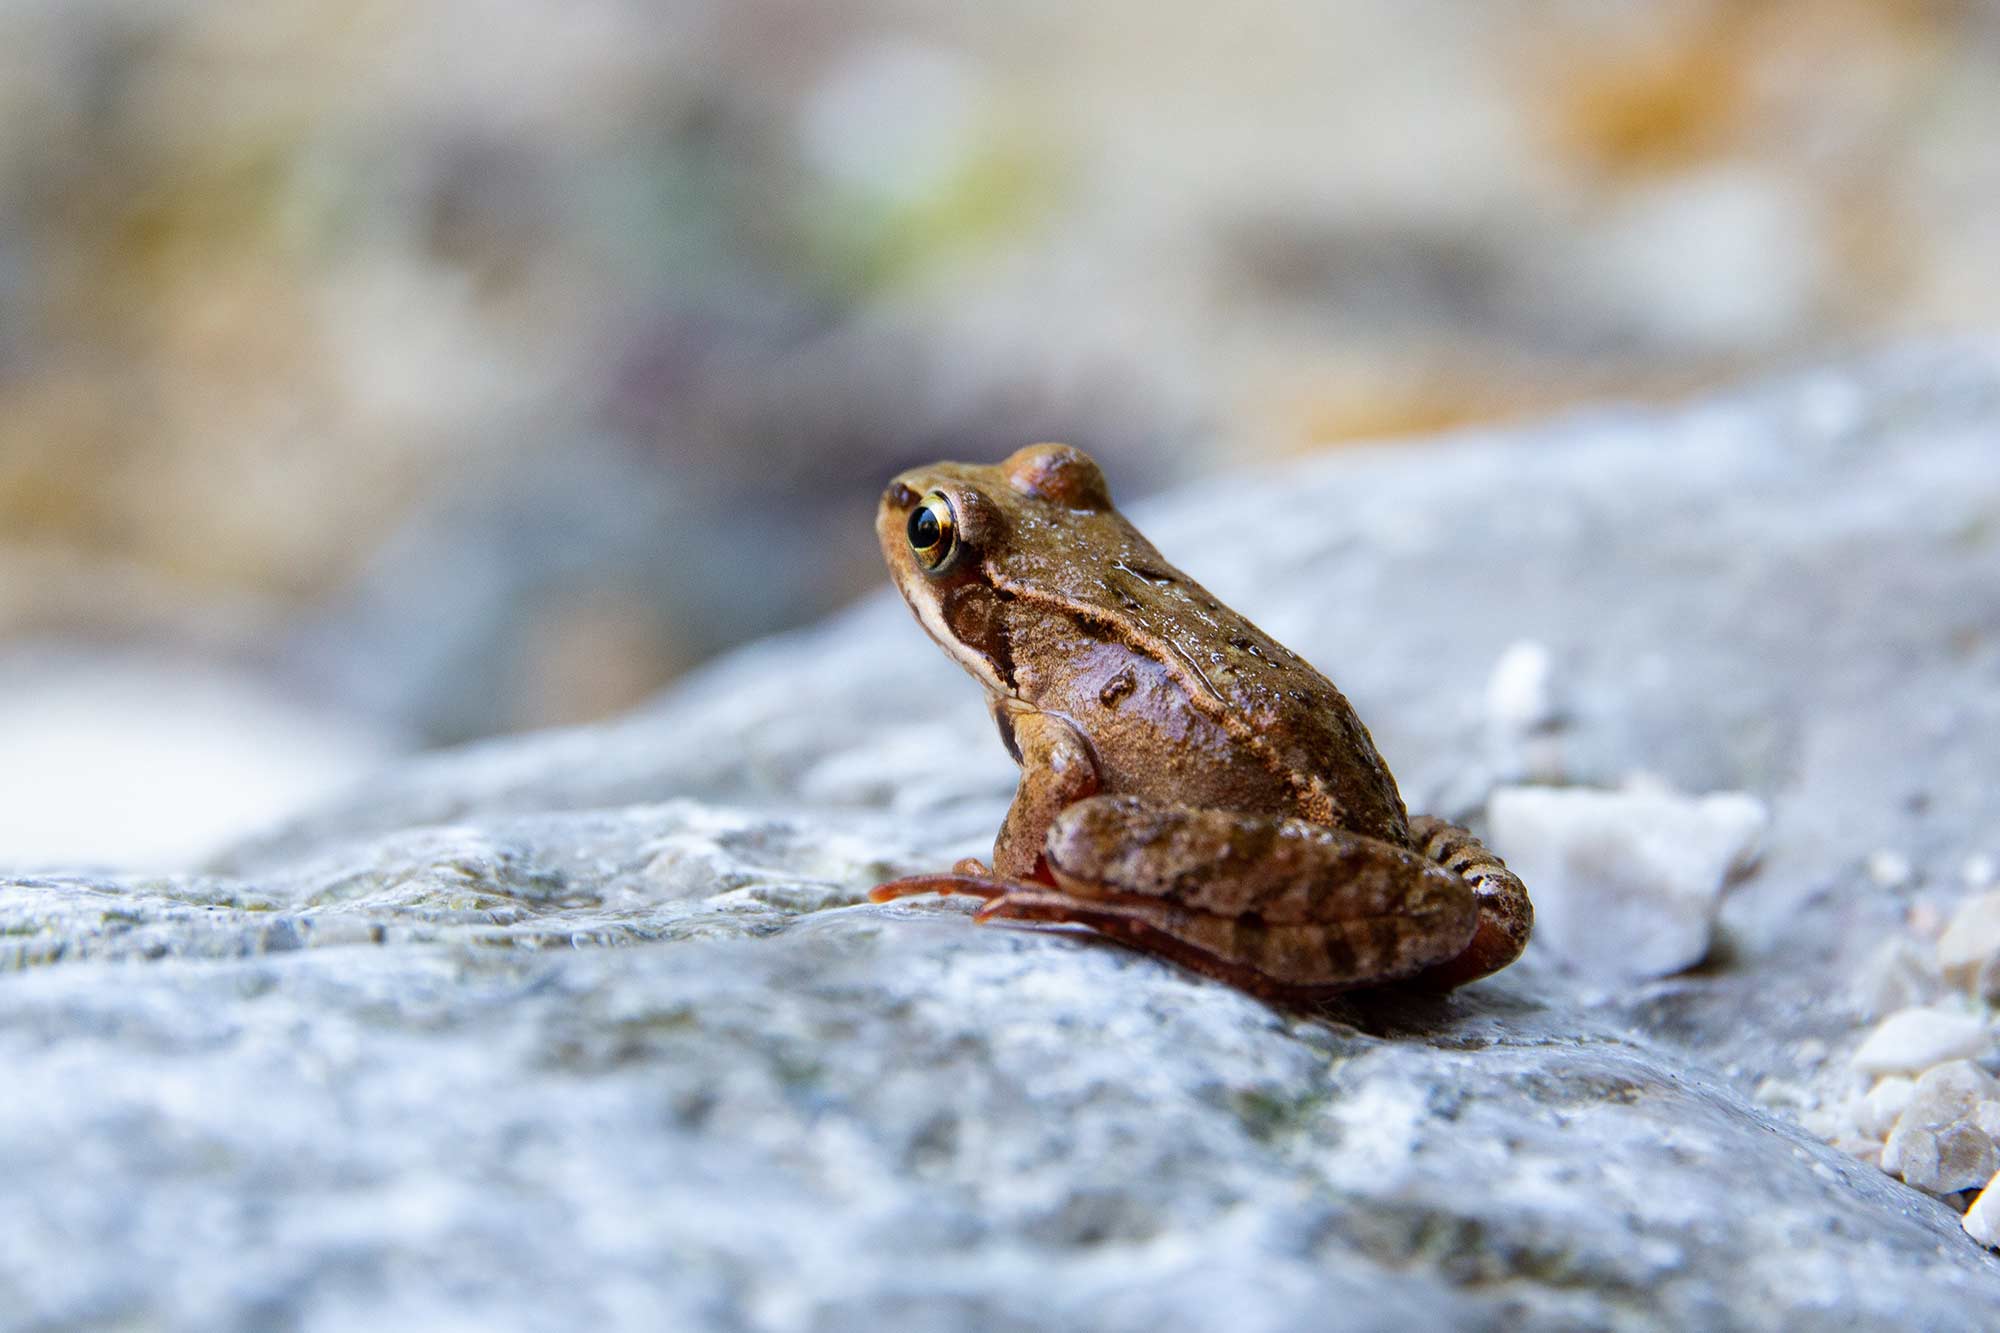 A common frog on a stone